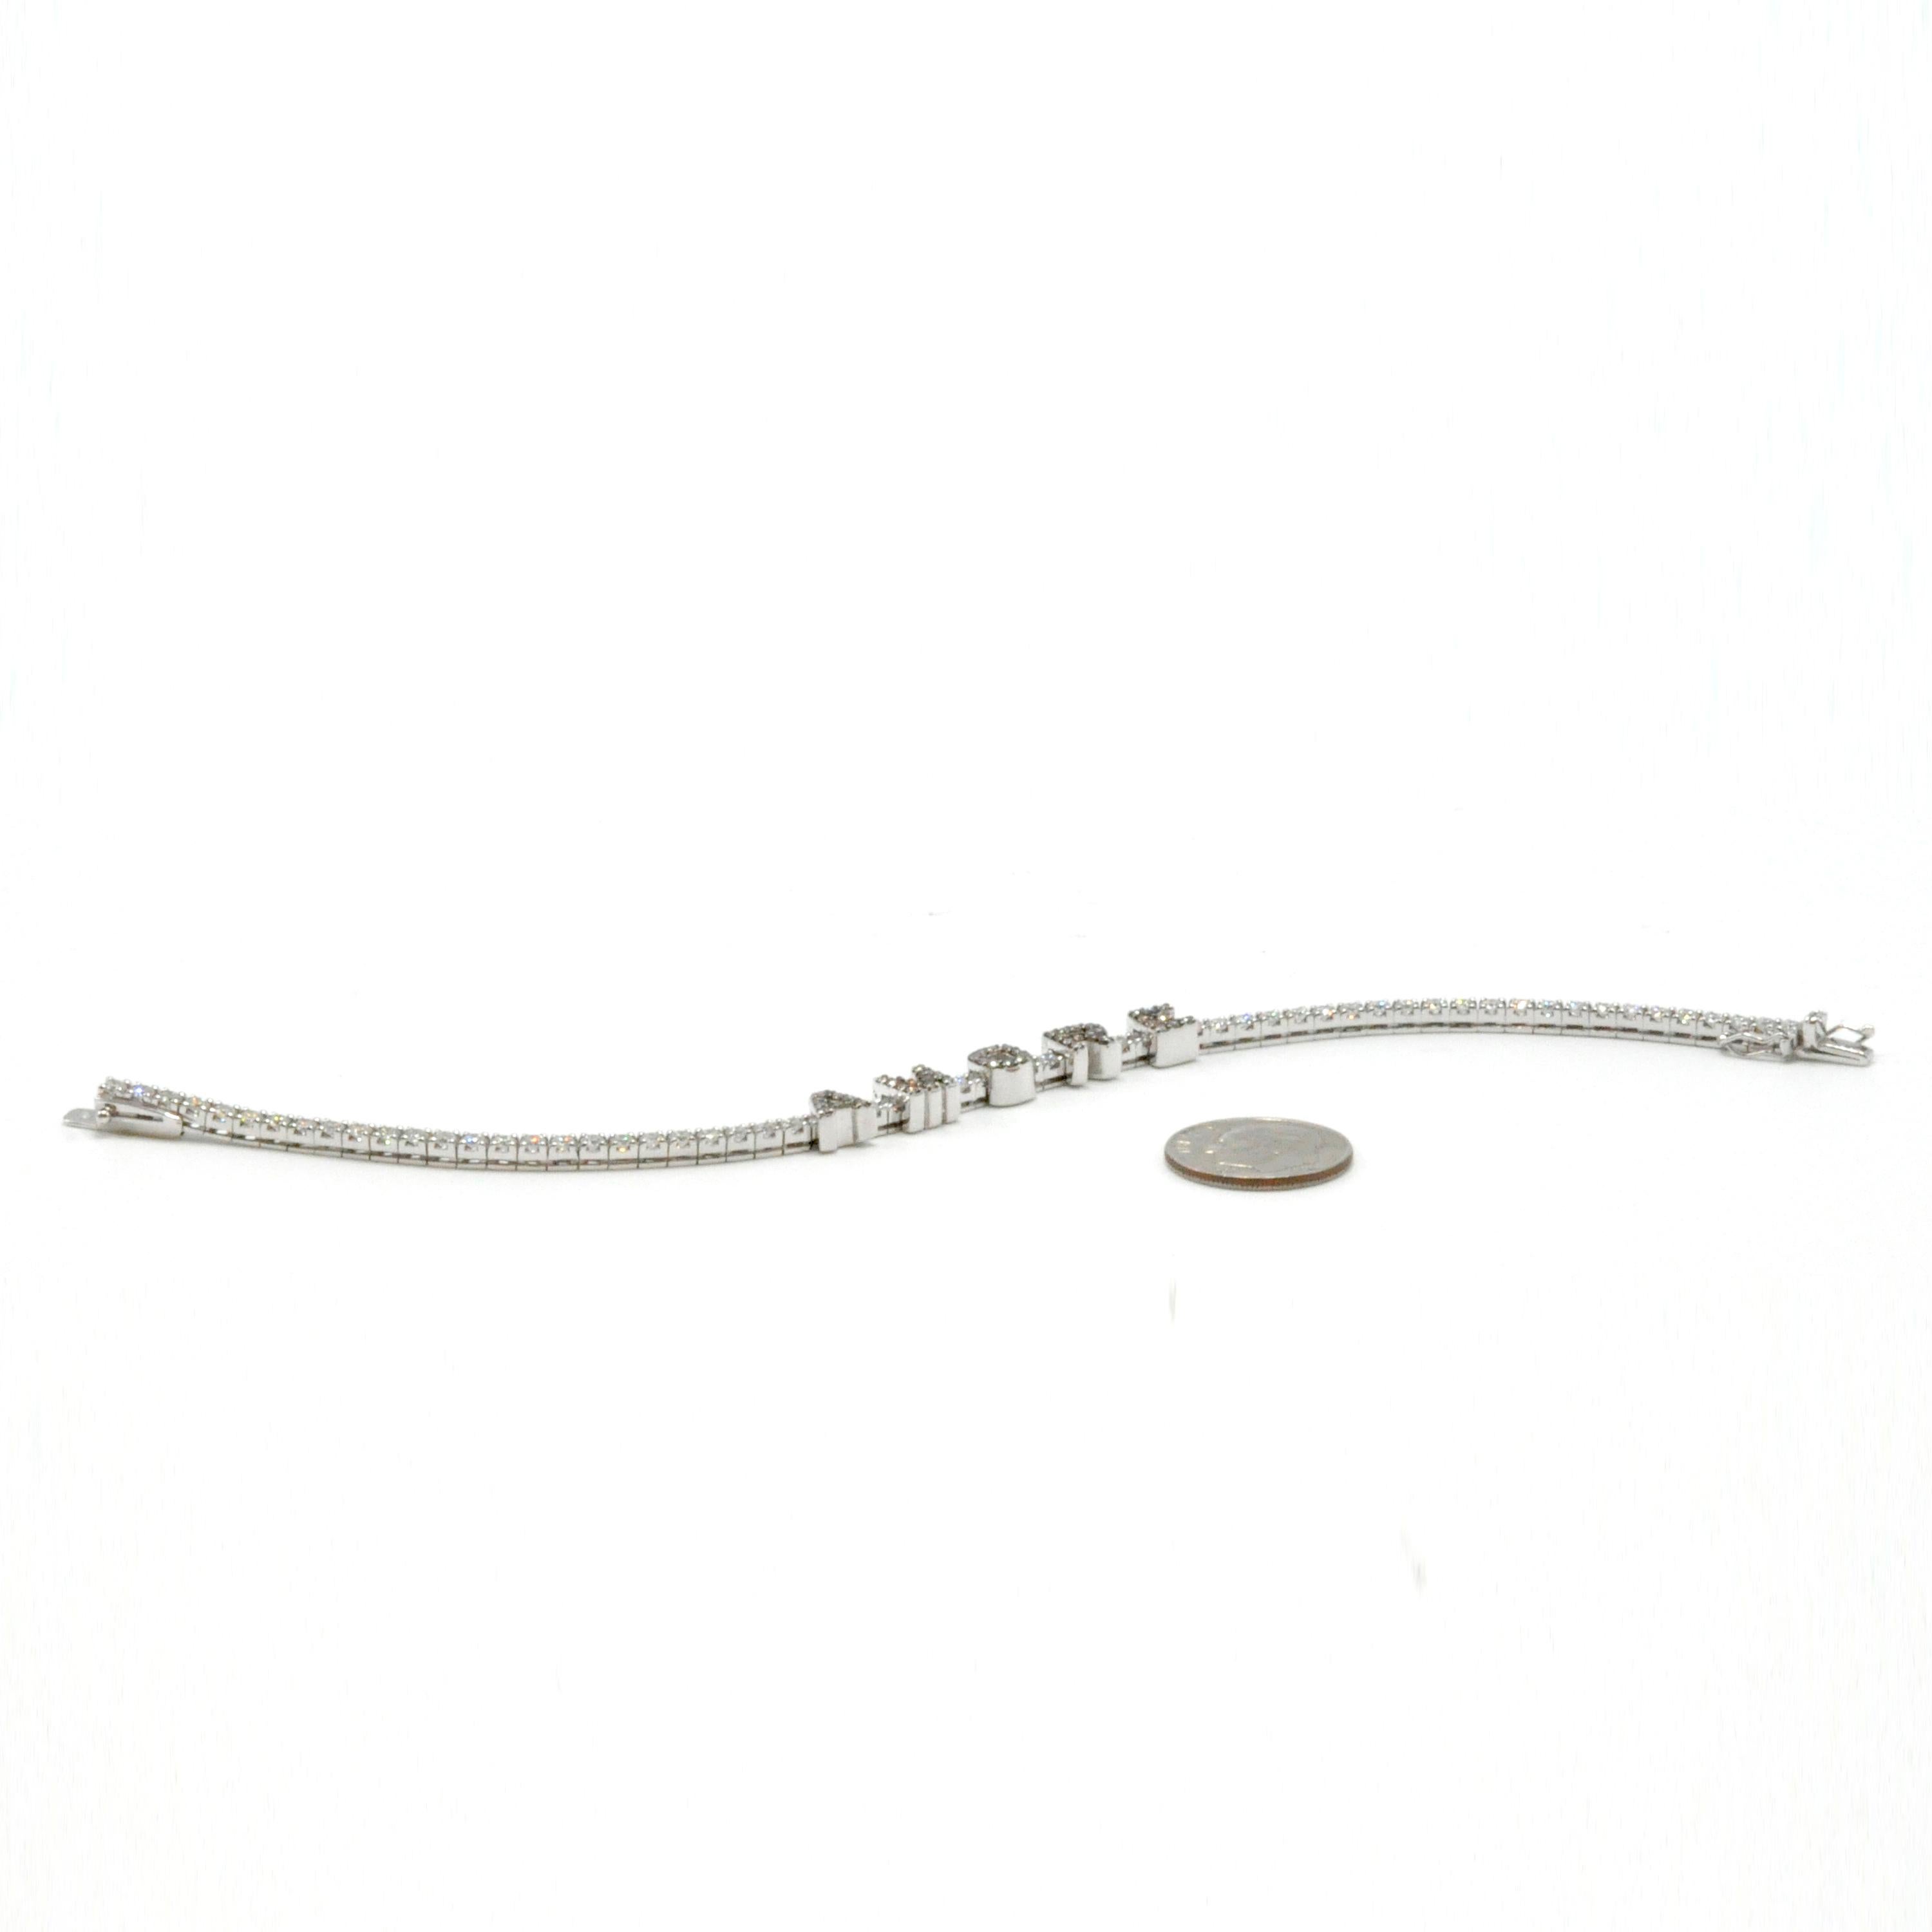 Round Cut Orianne Collins Amore White Gold Chocolate and White Diamond Tennis Bracelet